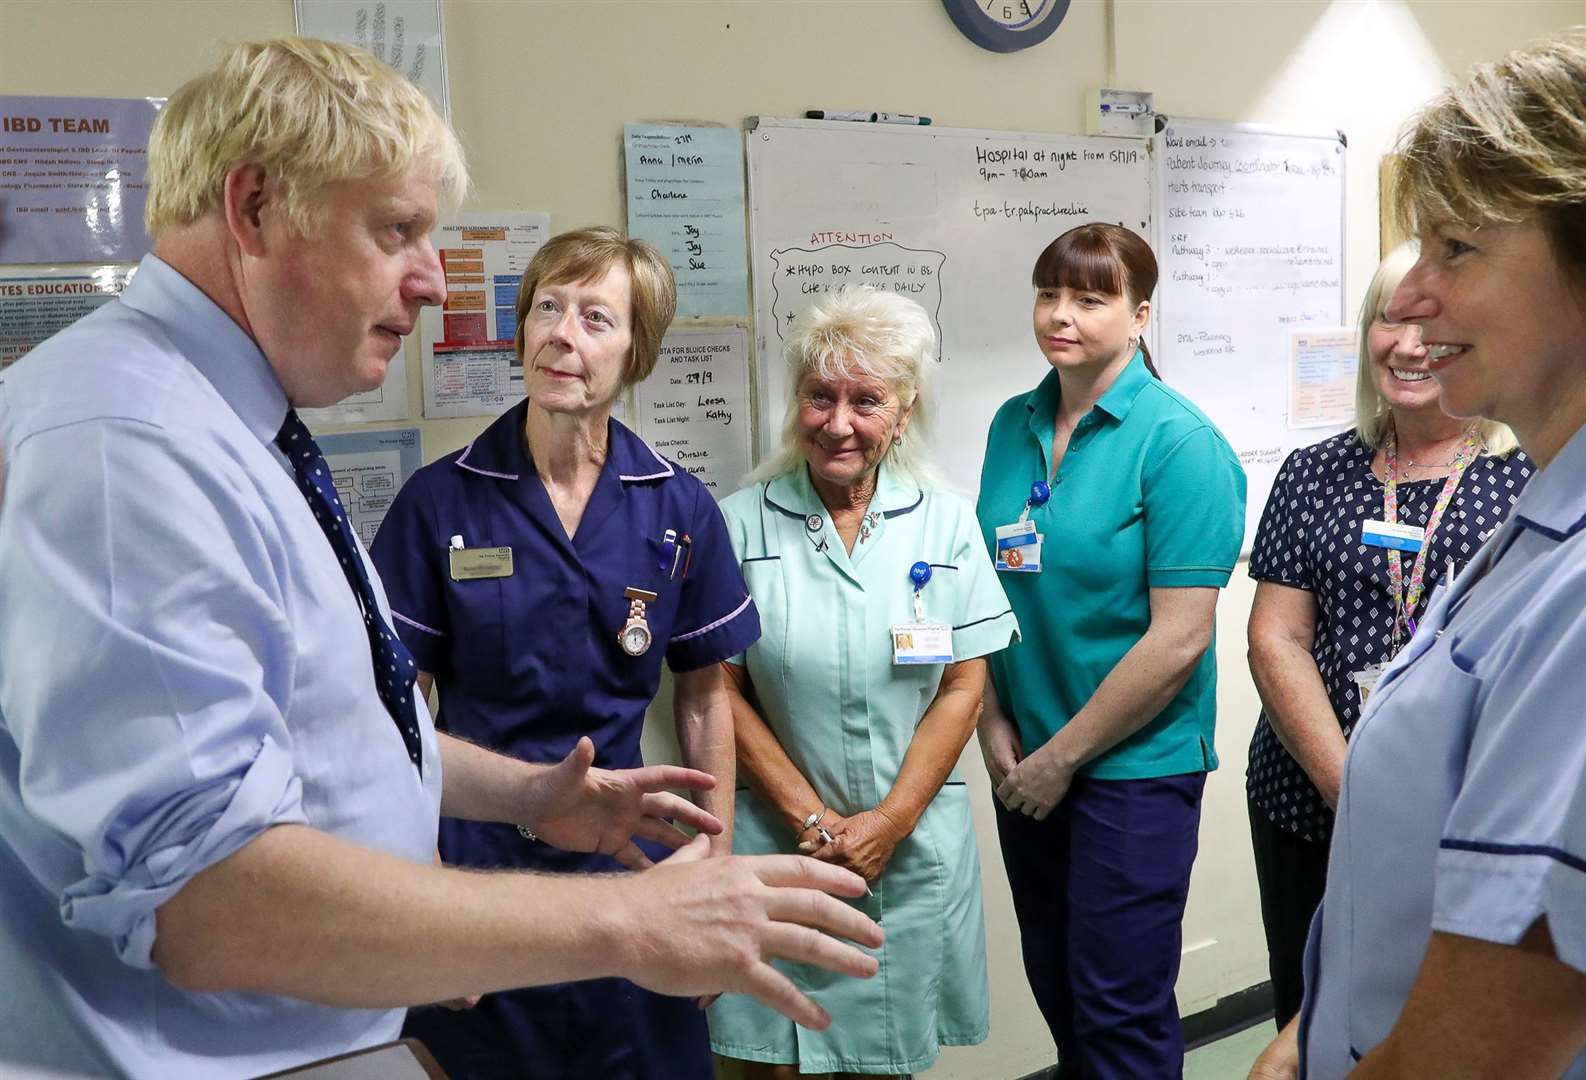 Prime Minister Boris Johnson has big issues to sort out with the health service